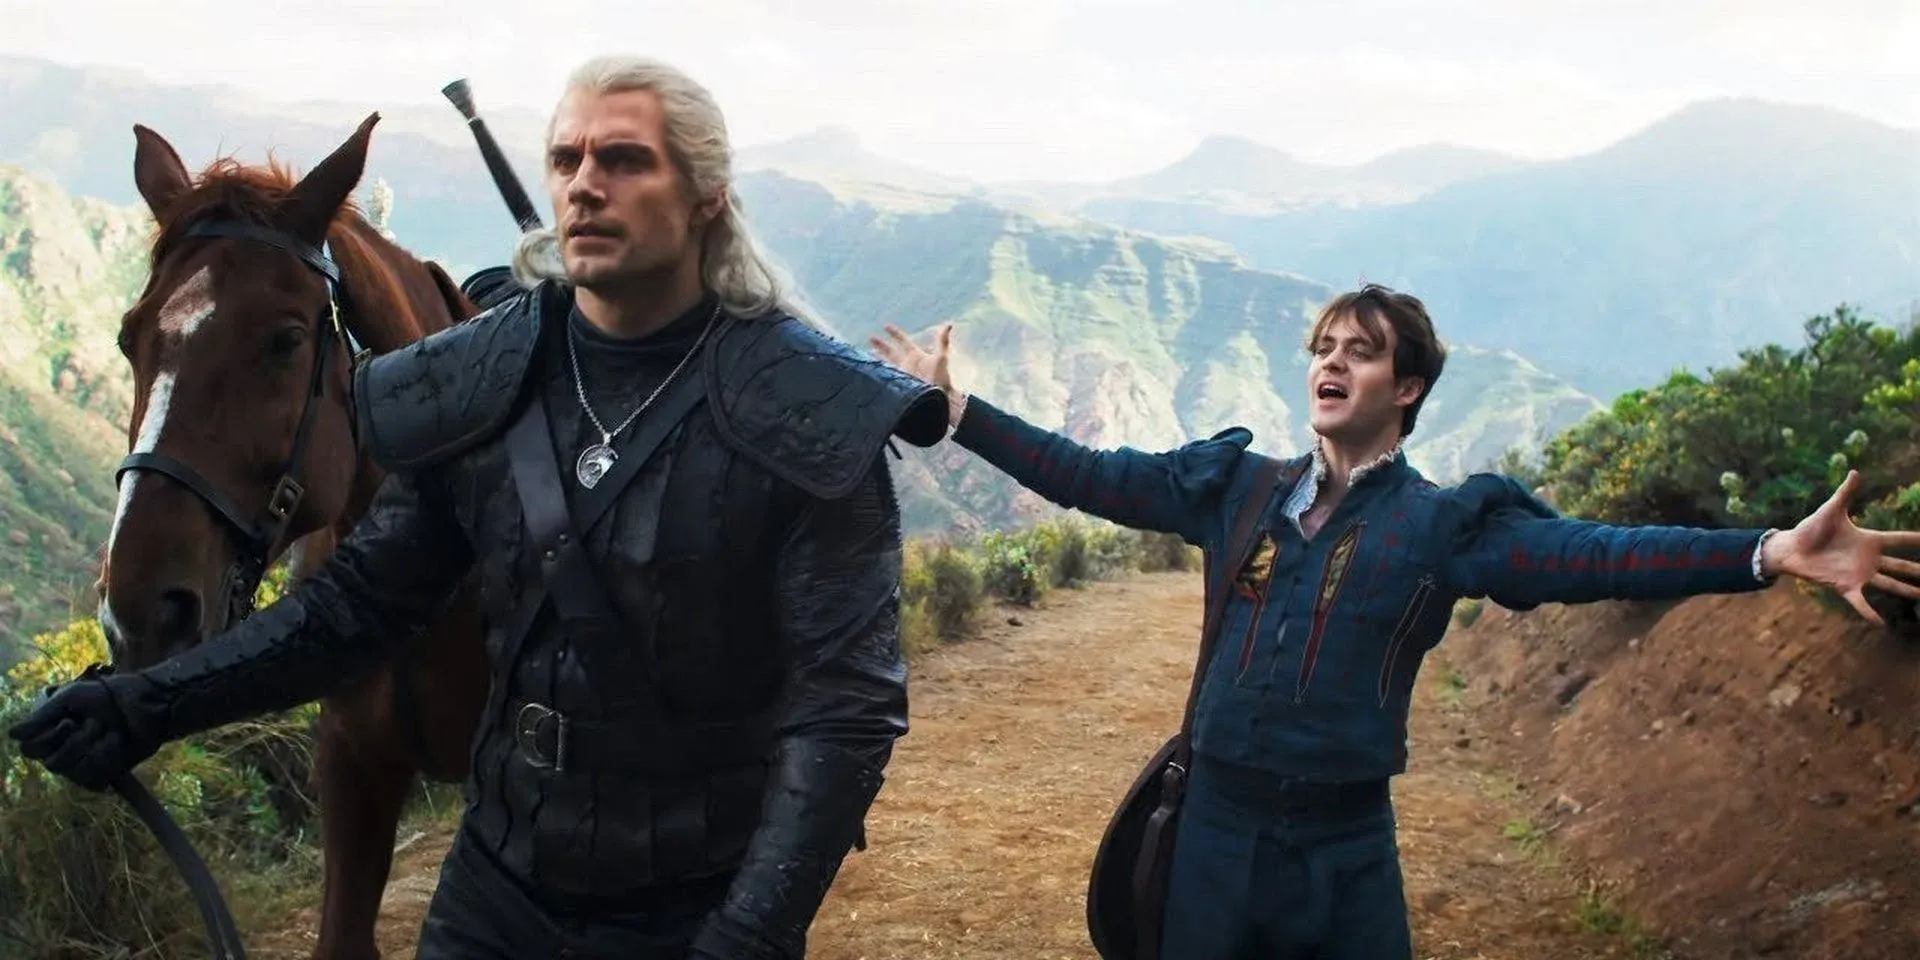 Henry Cavill as Geralt and Joey Batey as Jaskier in The Witcher